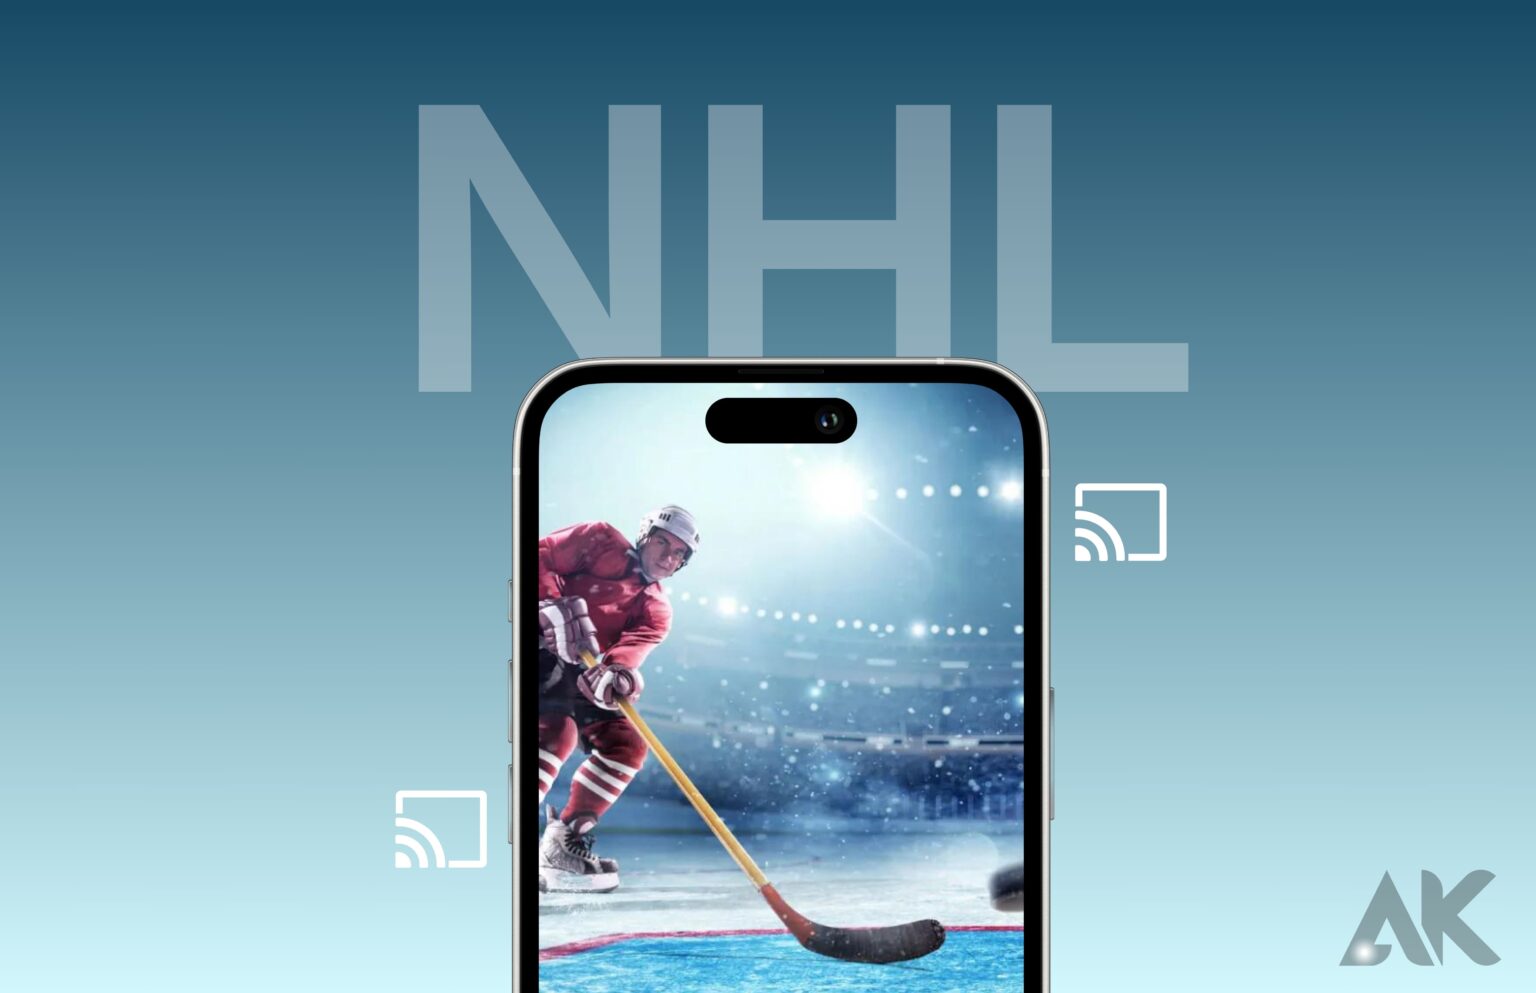 Best NHL streaming service